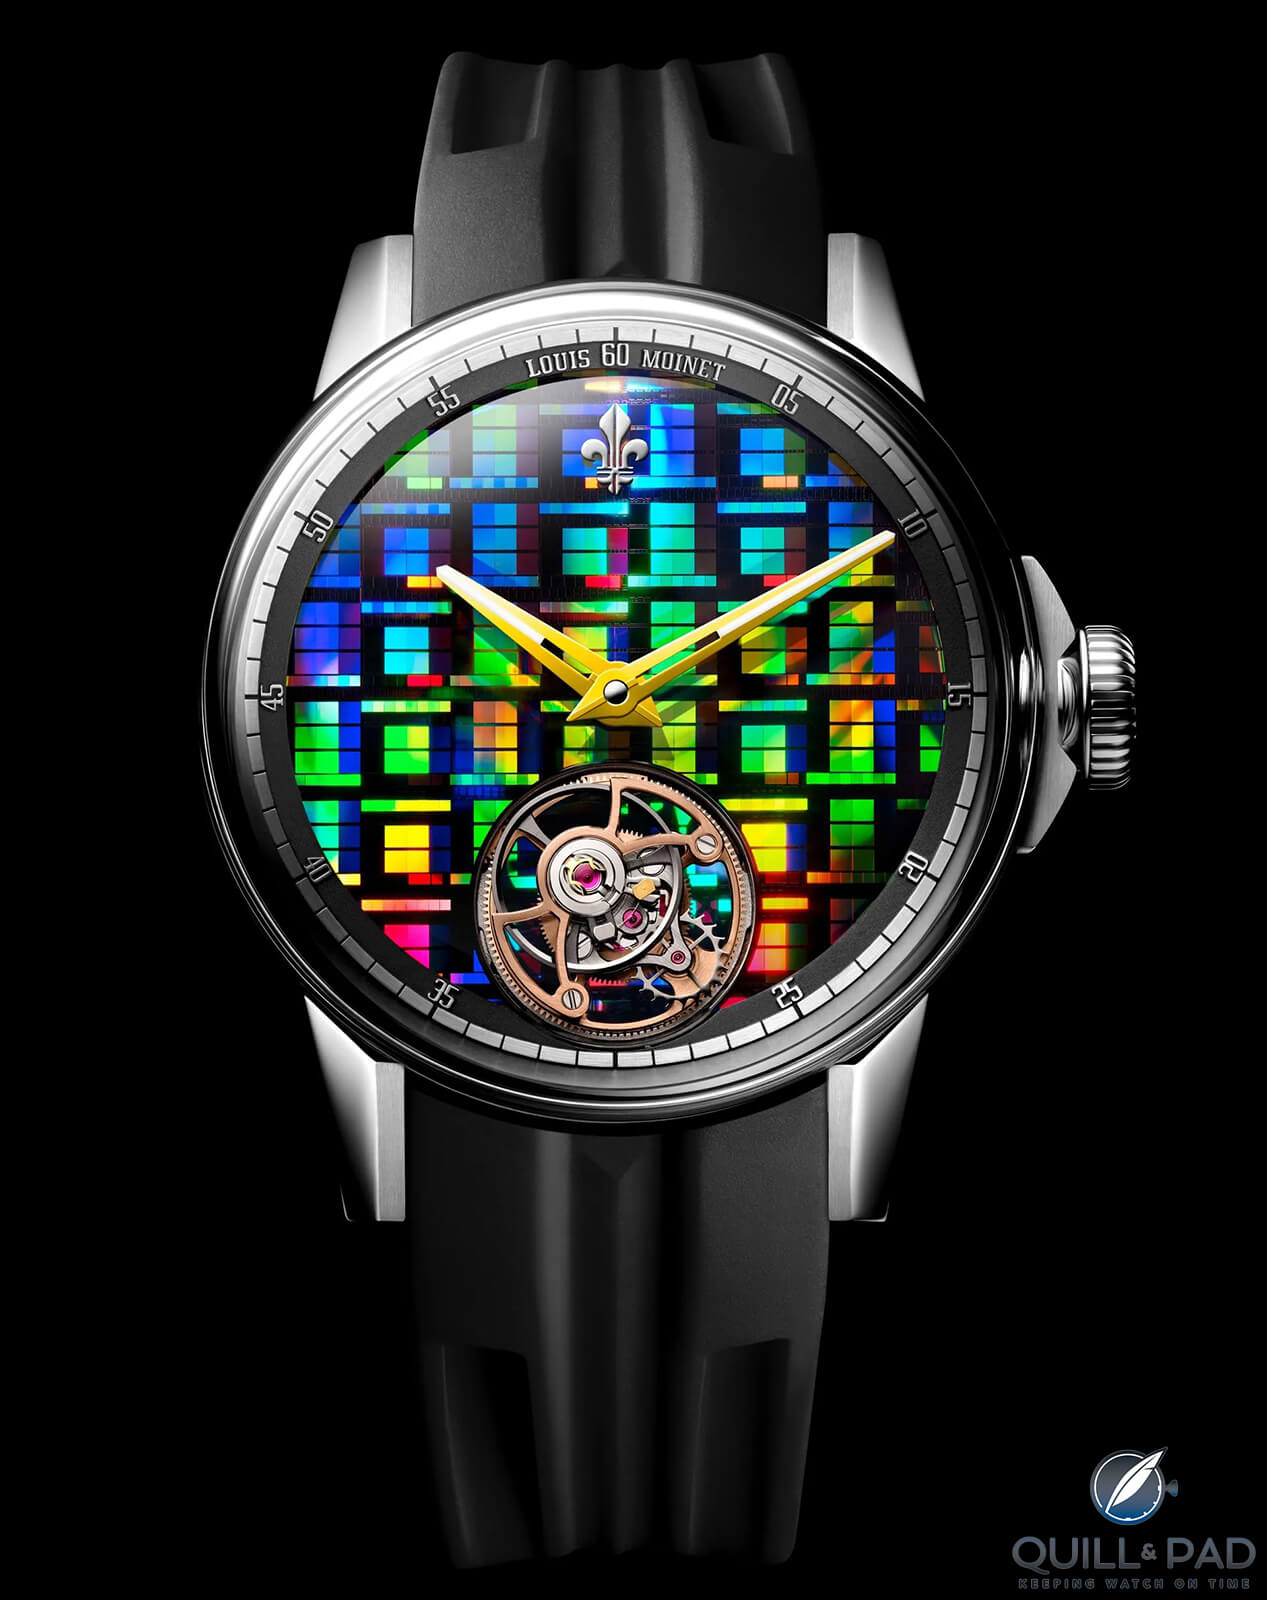 The New Louis Vuitton Tambour; Redefined and Redesigned